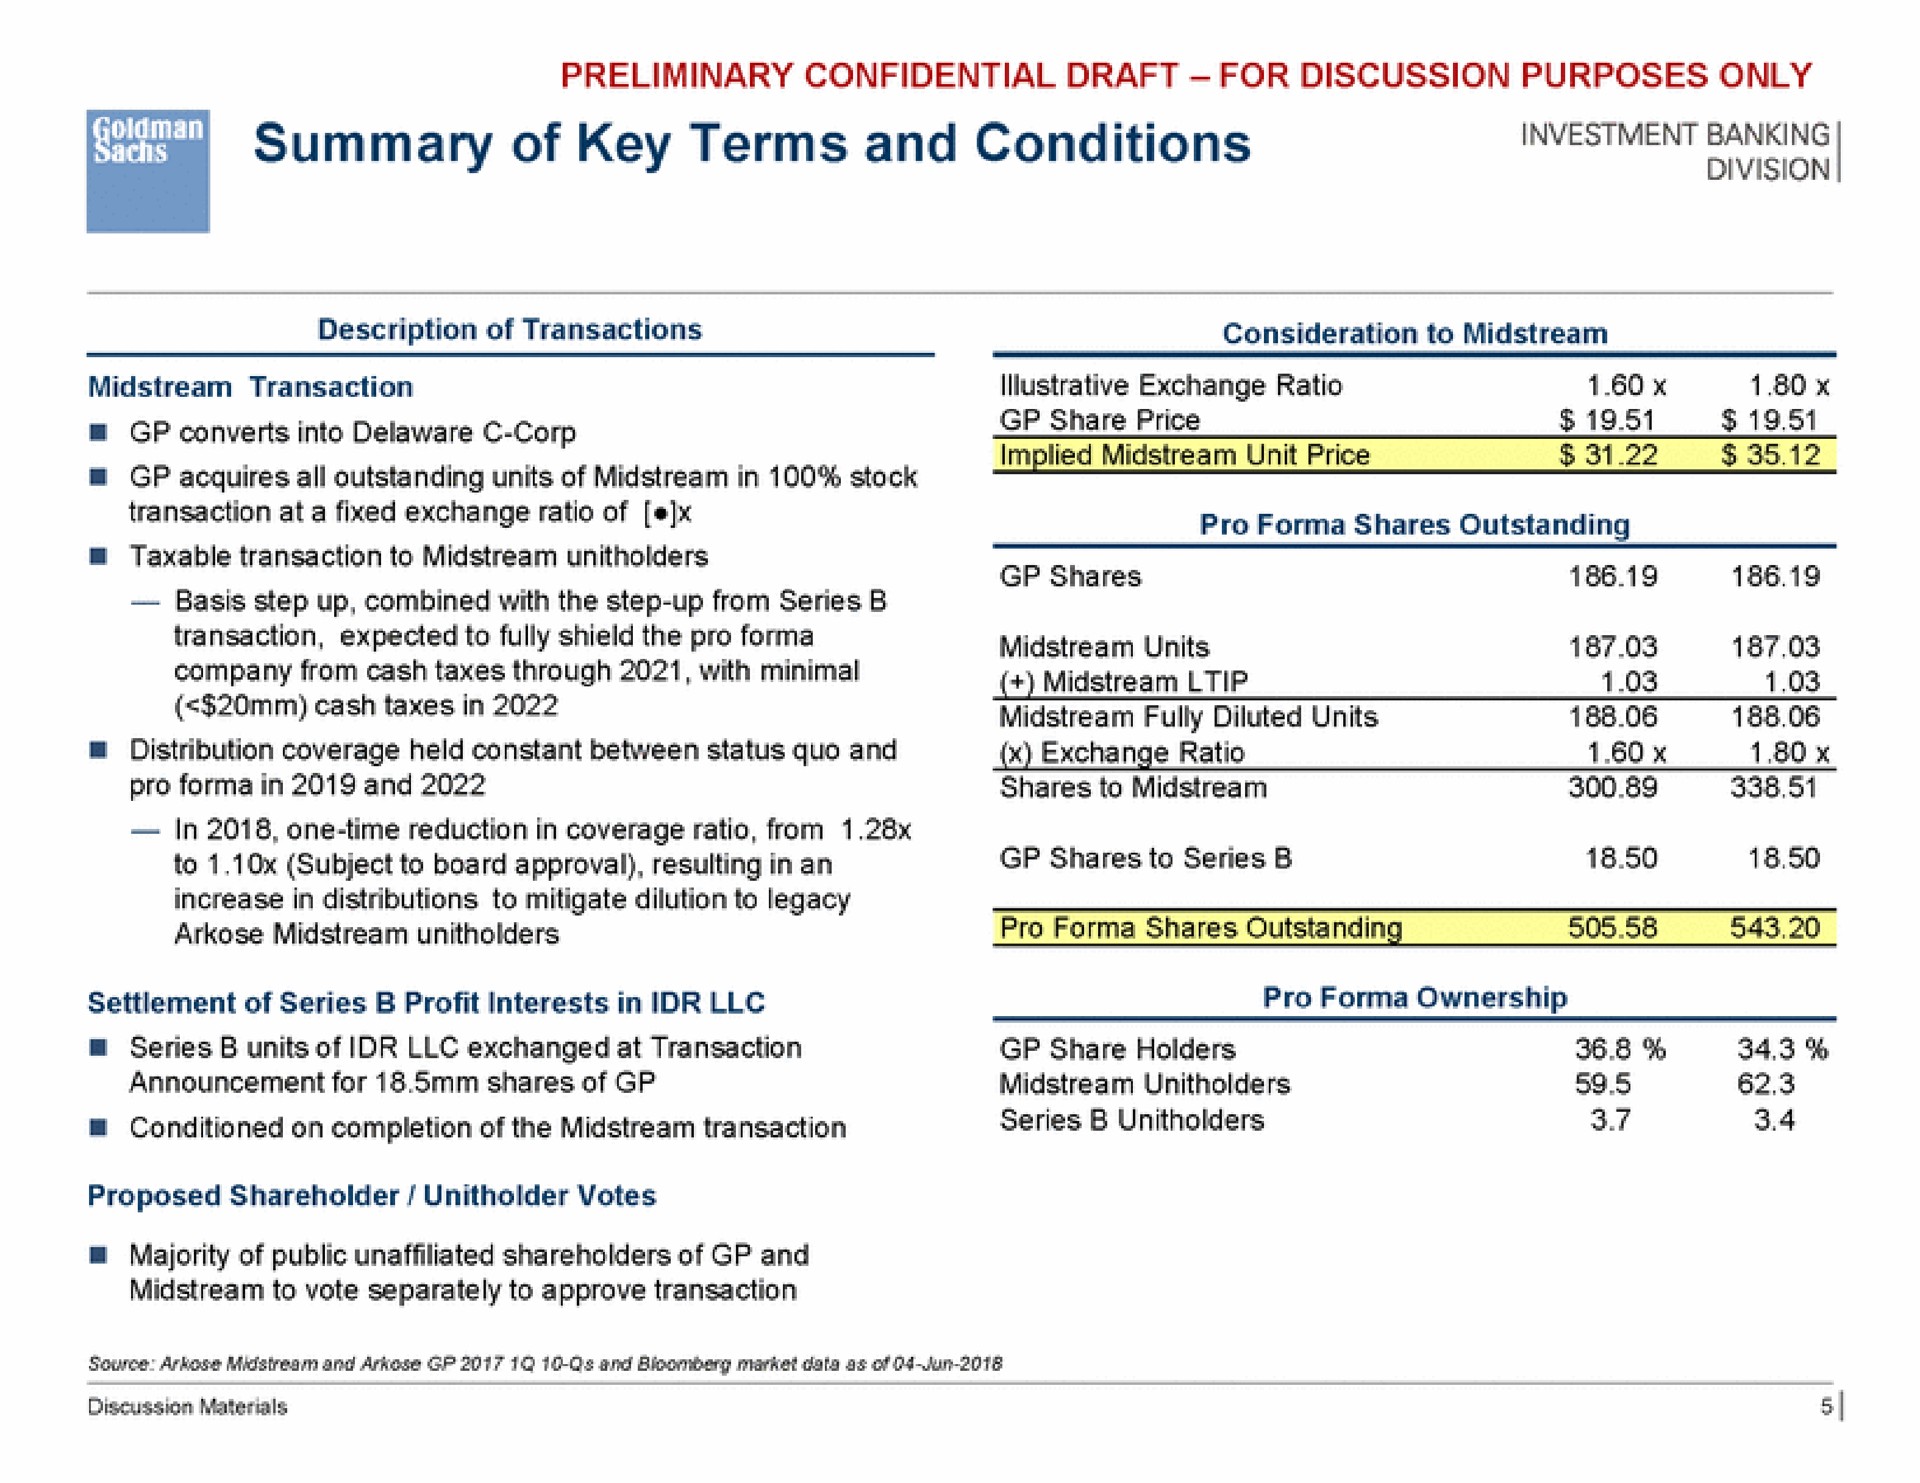 summary of key terms and conditions share holders | Goldman Sachs